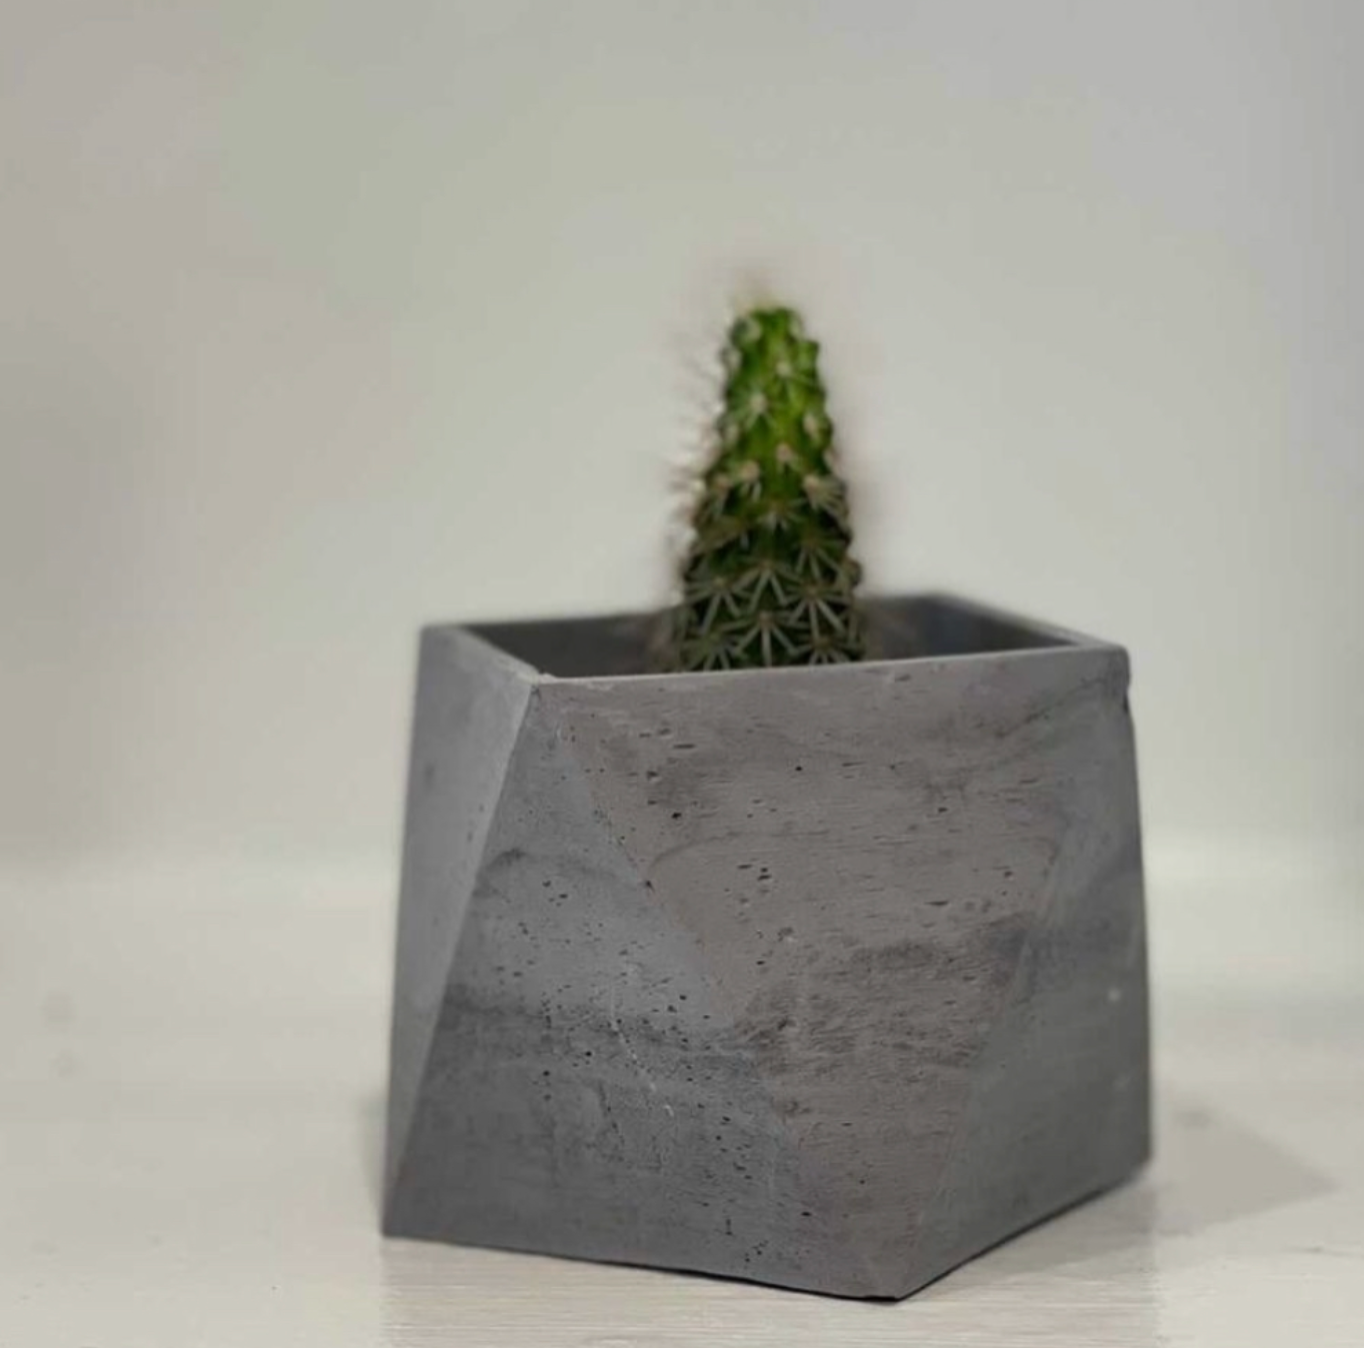 An Amelia Geometric Planter, created by Queen City ‘Crete, holds a tiny cactus.